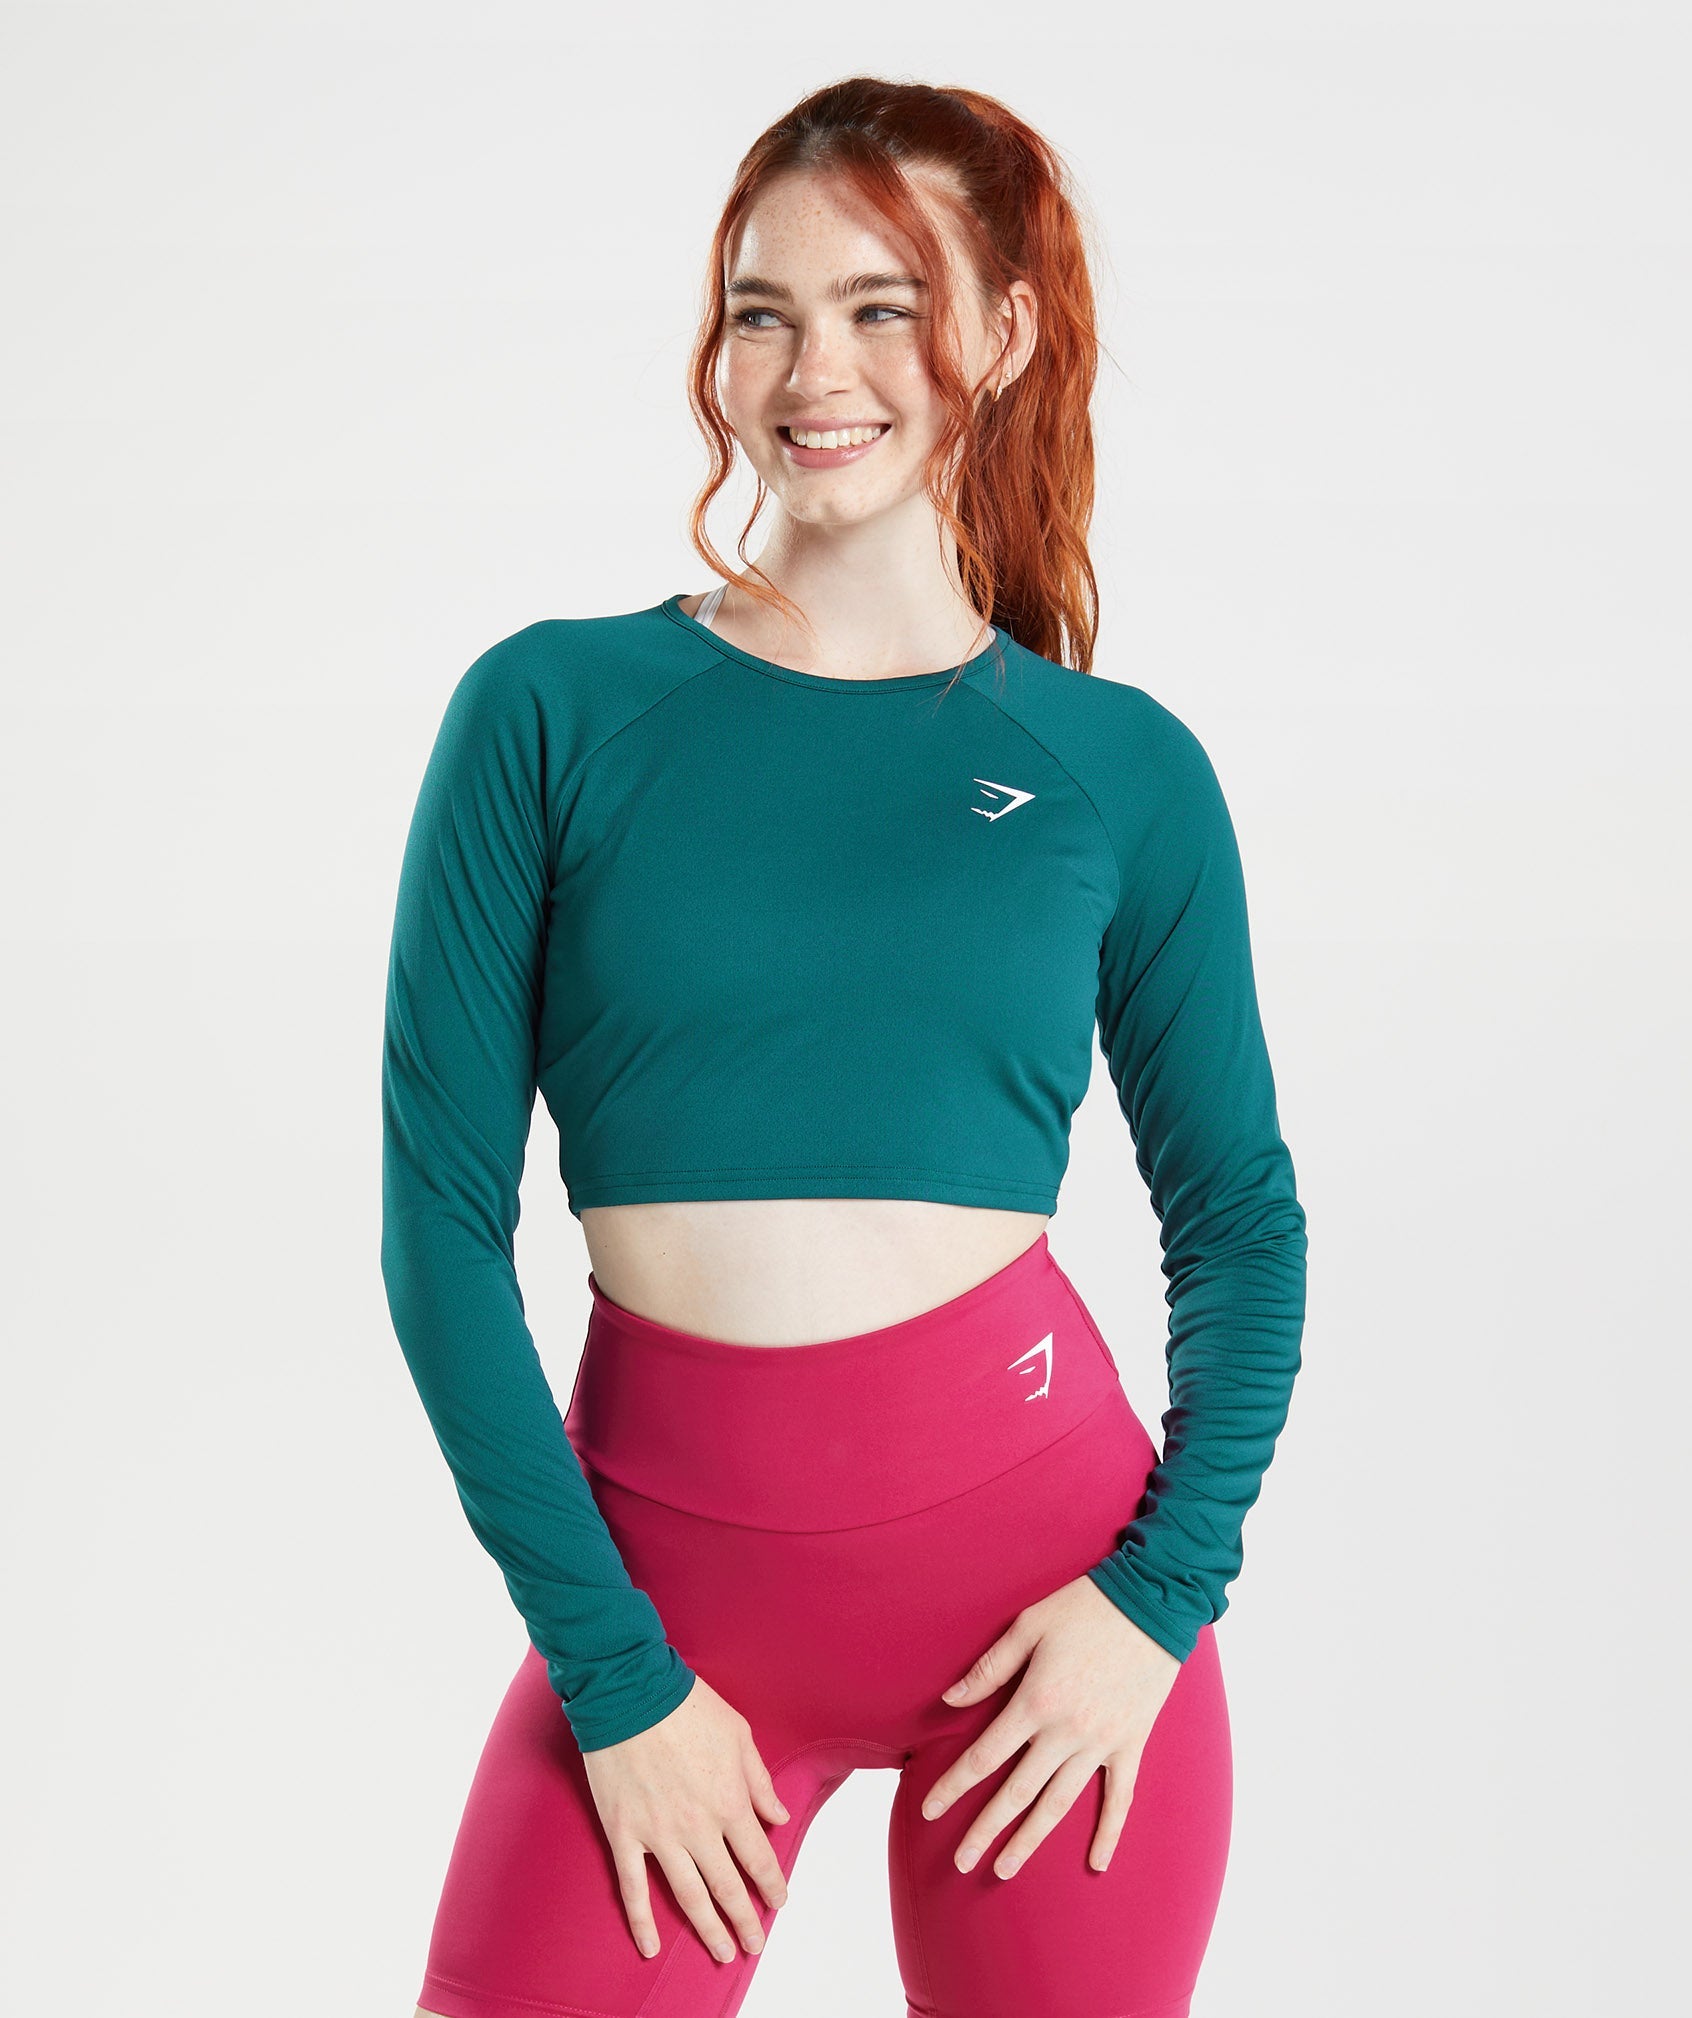 http://cdn.shopify.com/s/files/1/0156/6146/products/TRAININGLONGSLEEVECROPTOP-WinterTealB2A4F-TBBY.AllImages.jpg?v=1658865549